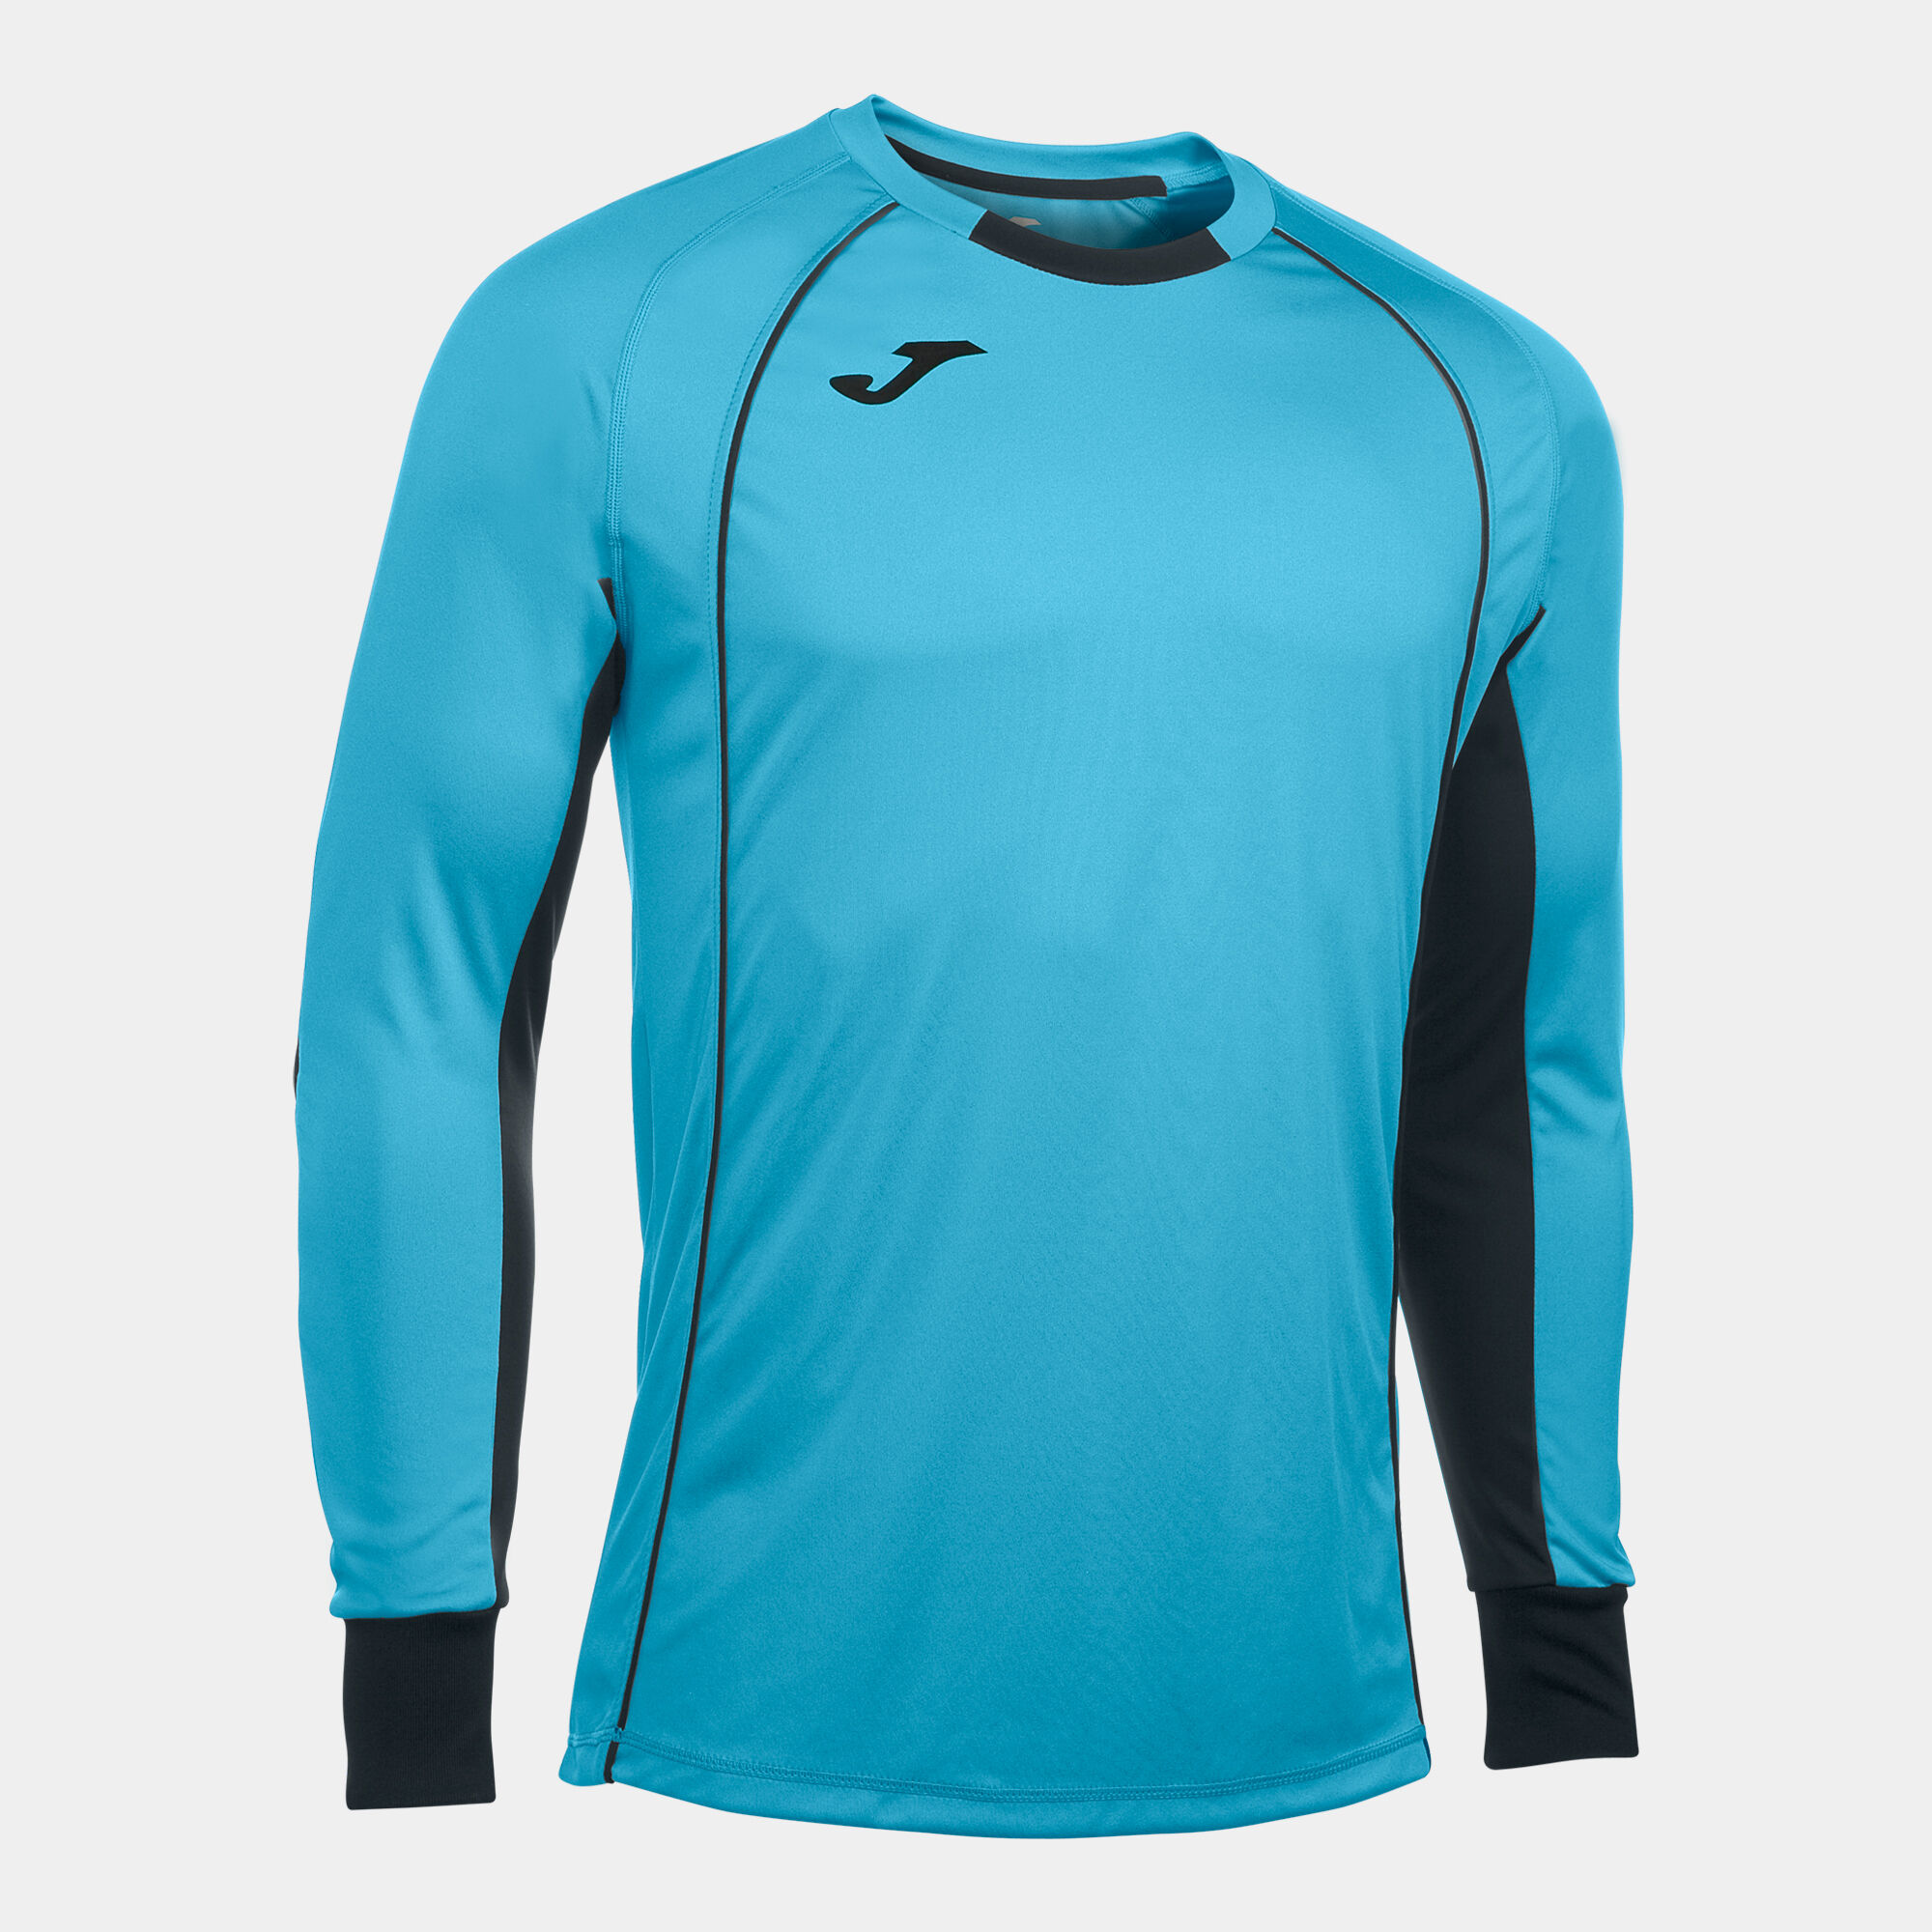 MAILLOT MANCHES LONGUES HOMME PROTEC TURQUOISE